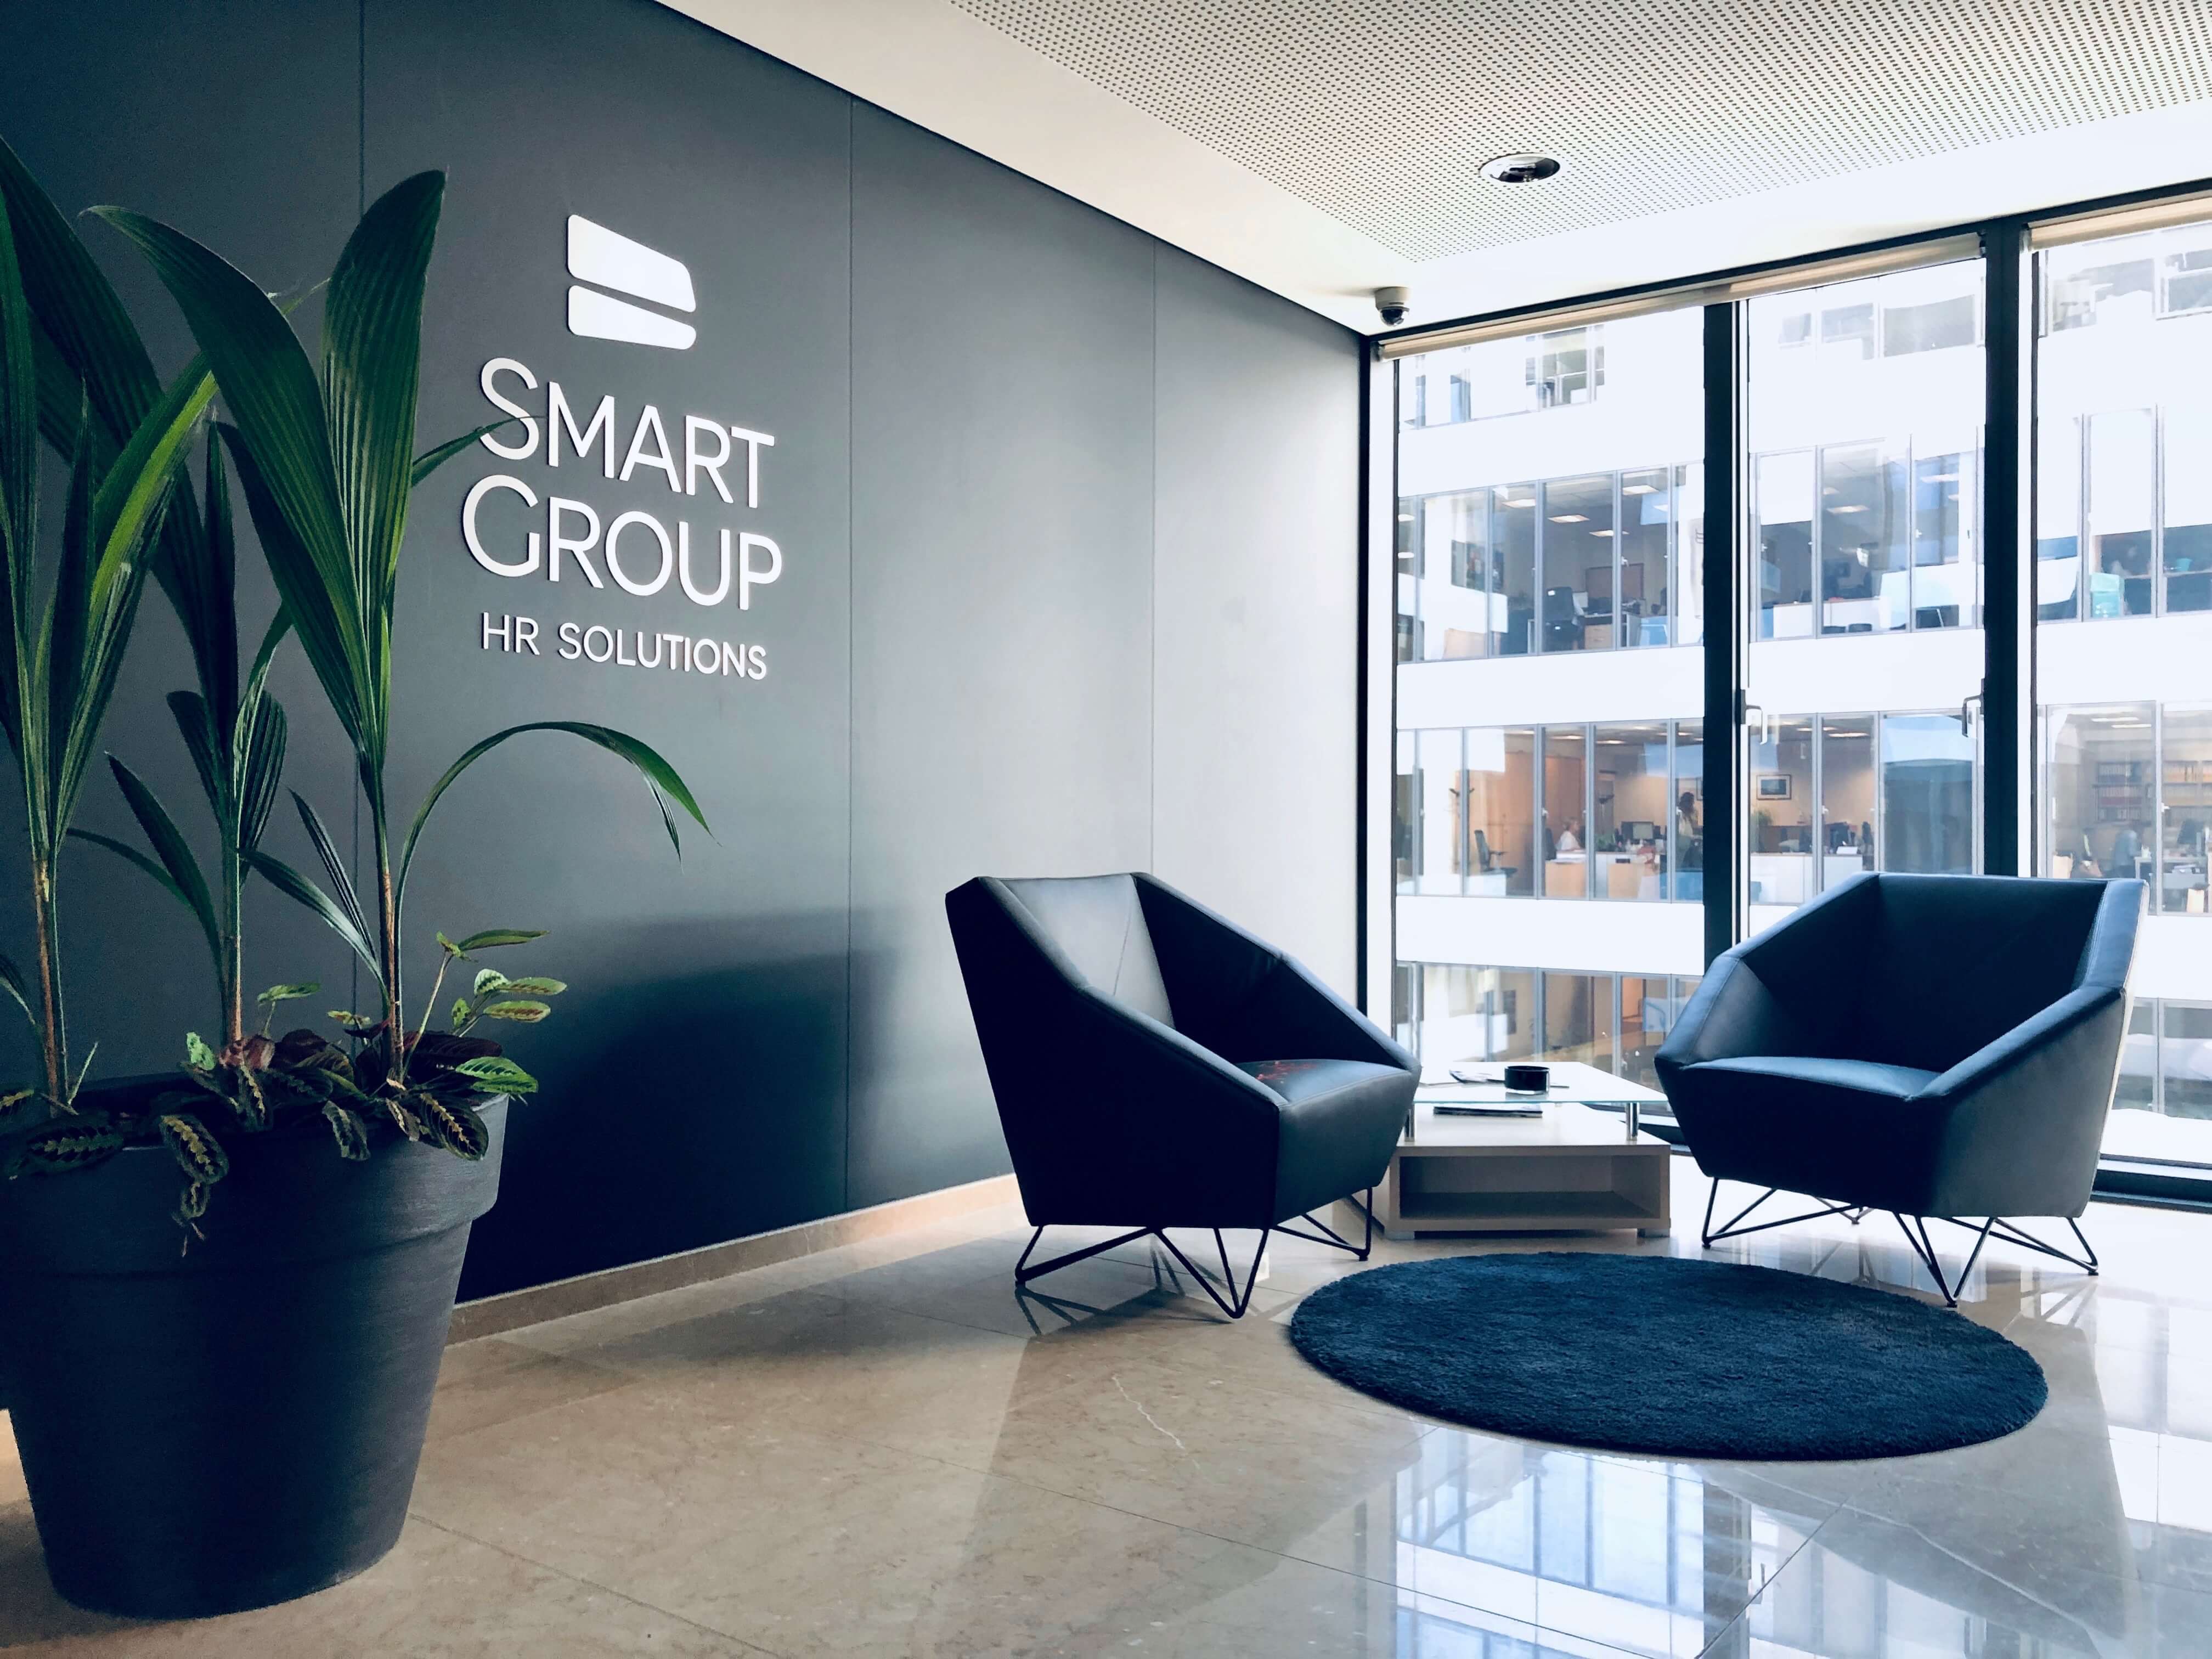 Smart Group Headhunting Agency Zagreb-HR Solutions